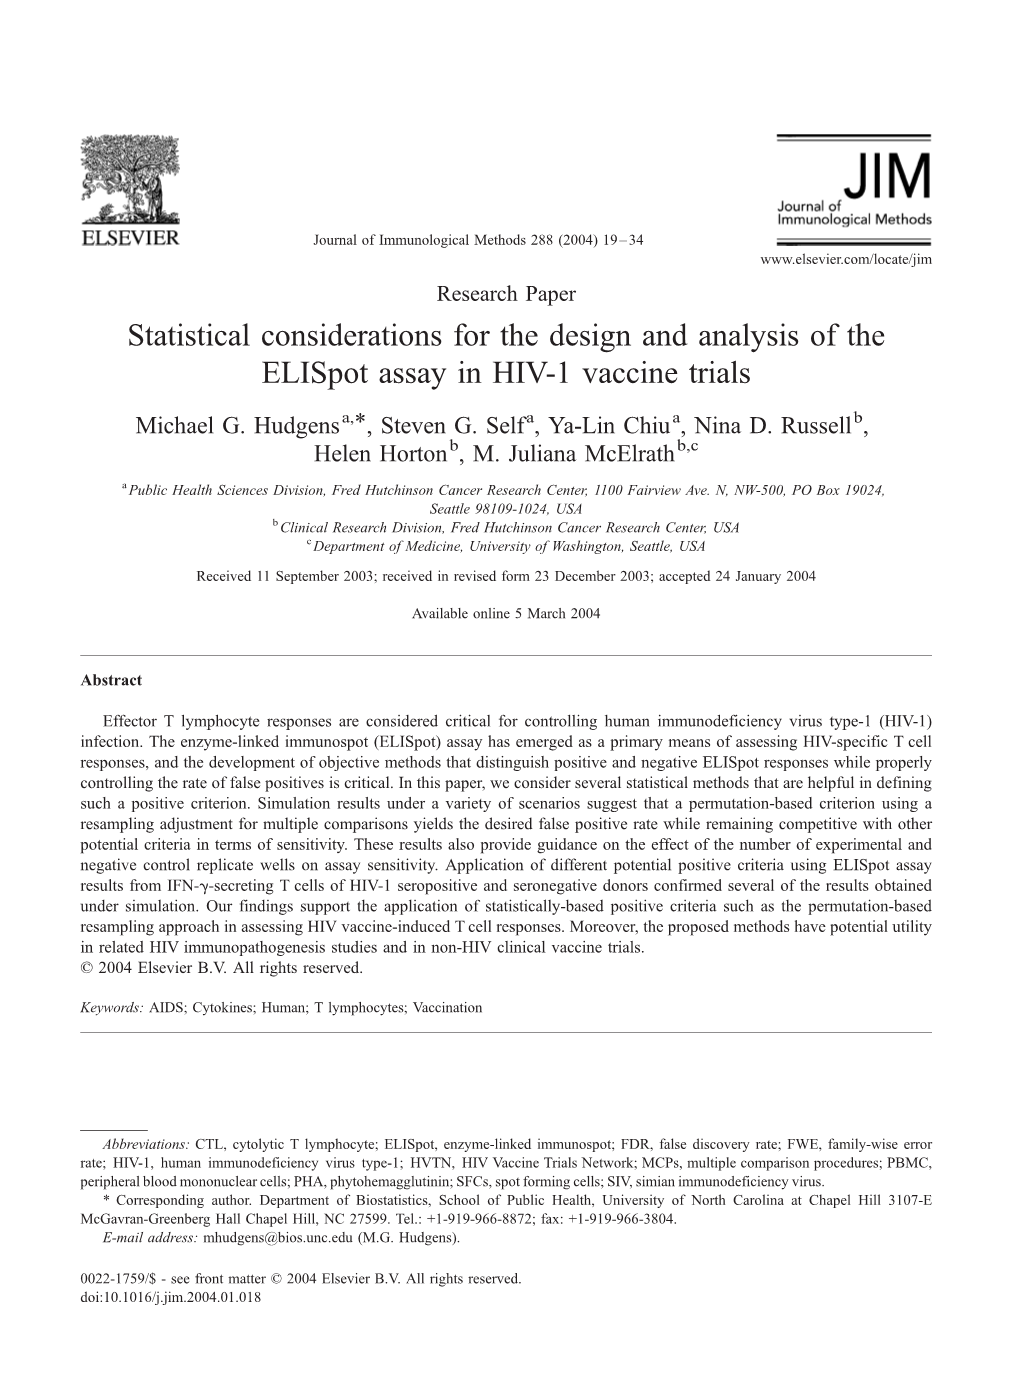 Statistical Considerations for the Design and Analysis of the Elispot Assay in HIV-1 Vaccine Trials